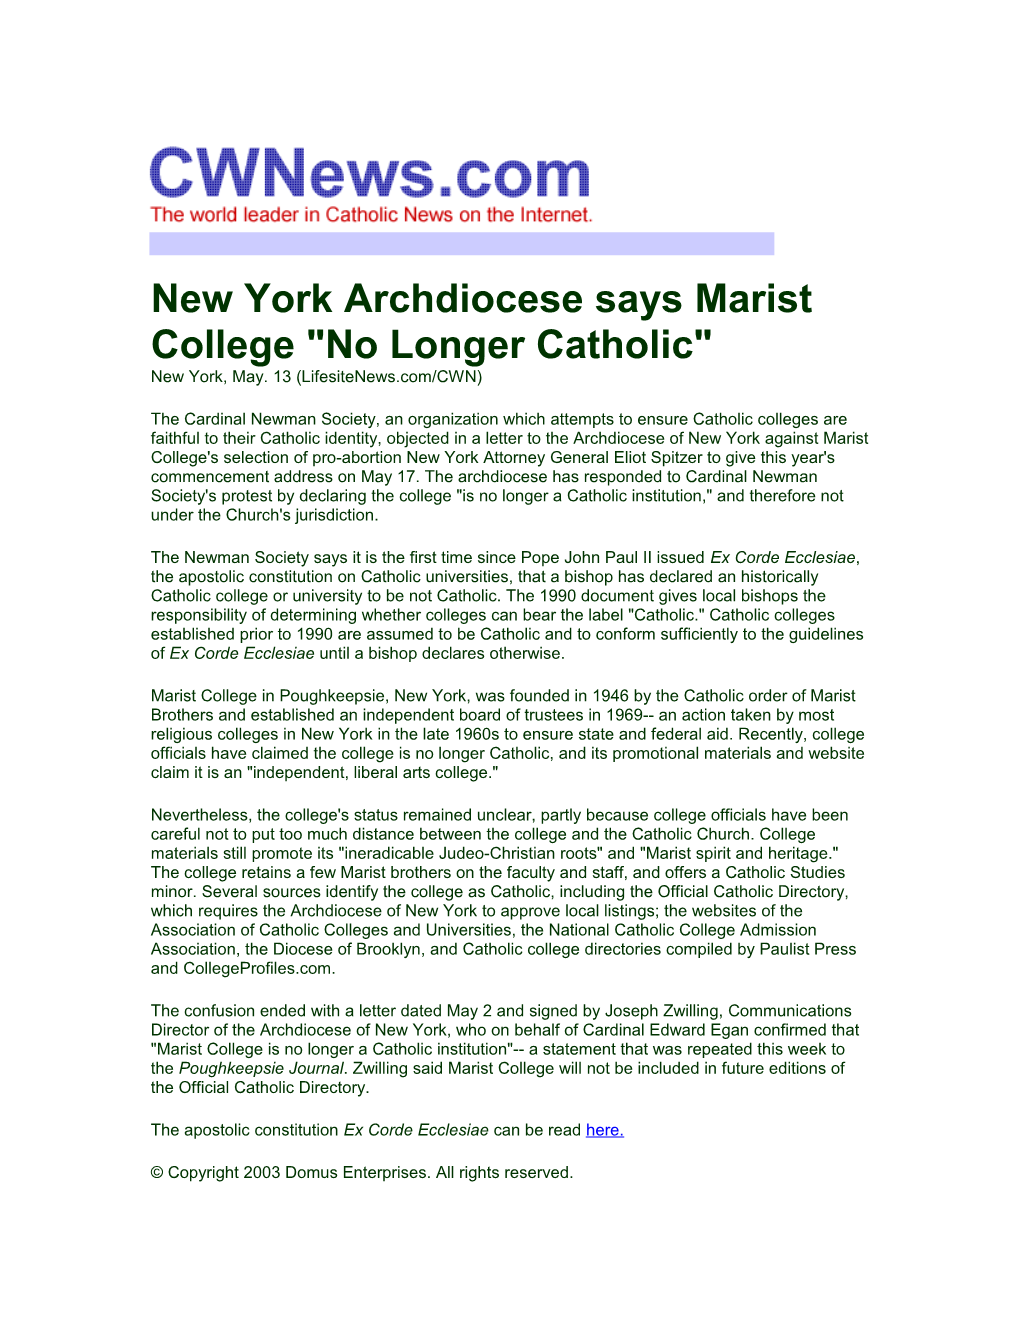 New York Archdiocese Says Marist College No Longer Catholic New York, May. 13